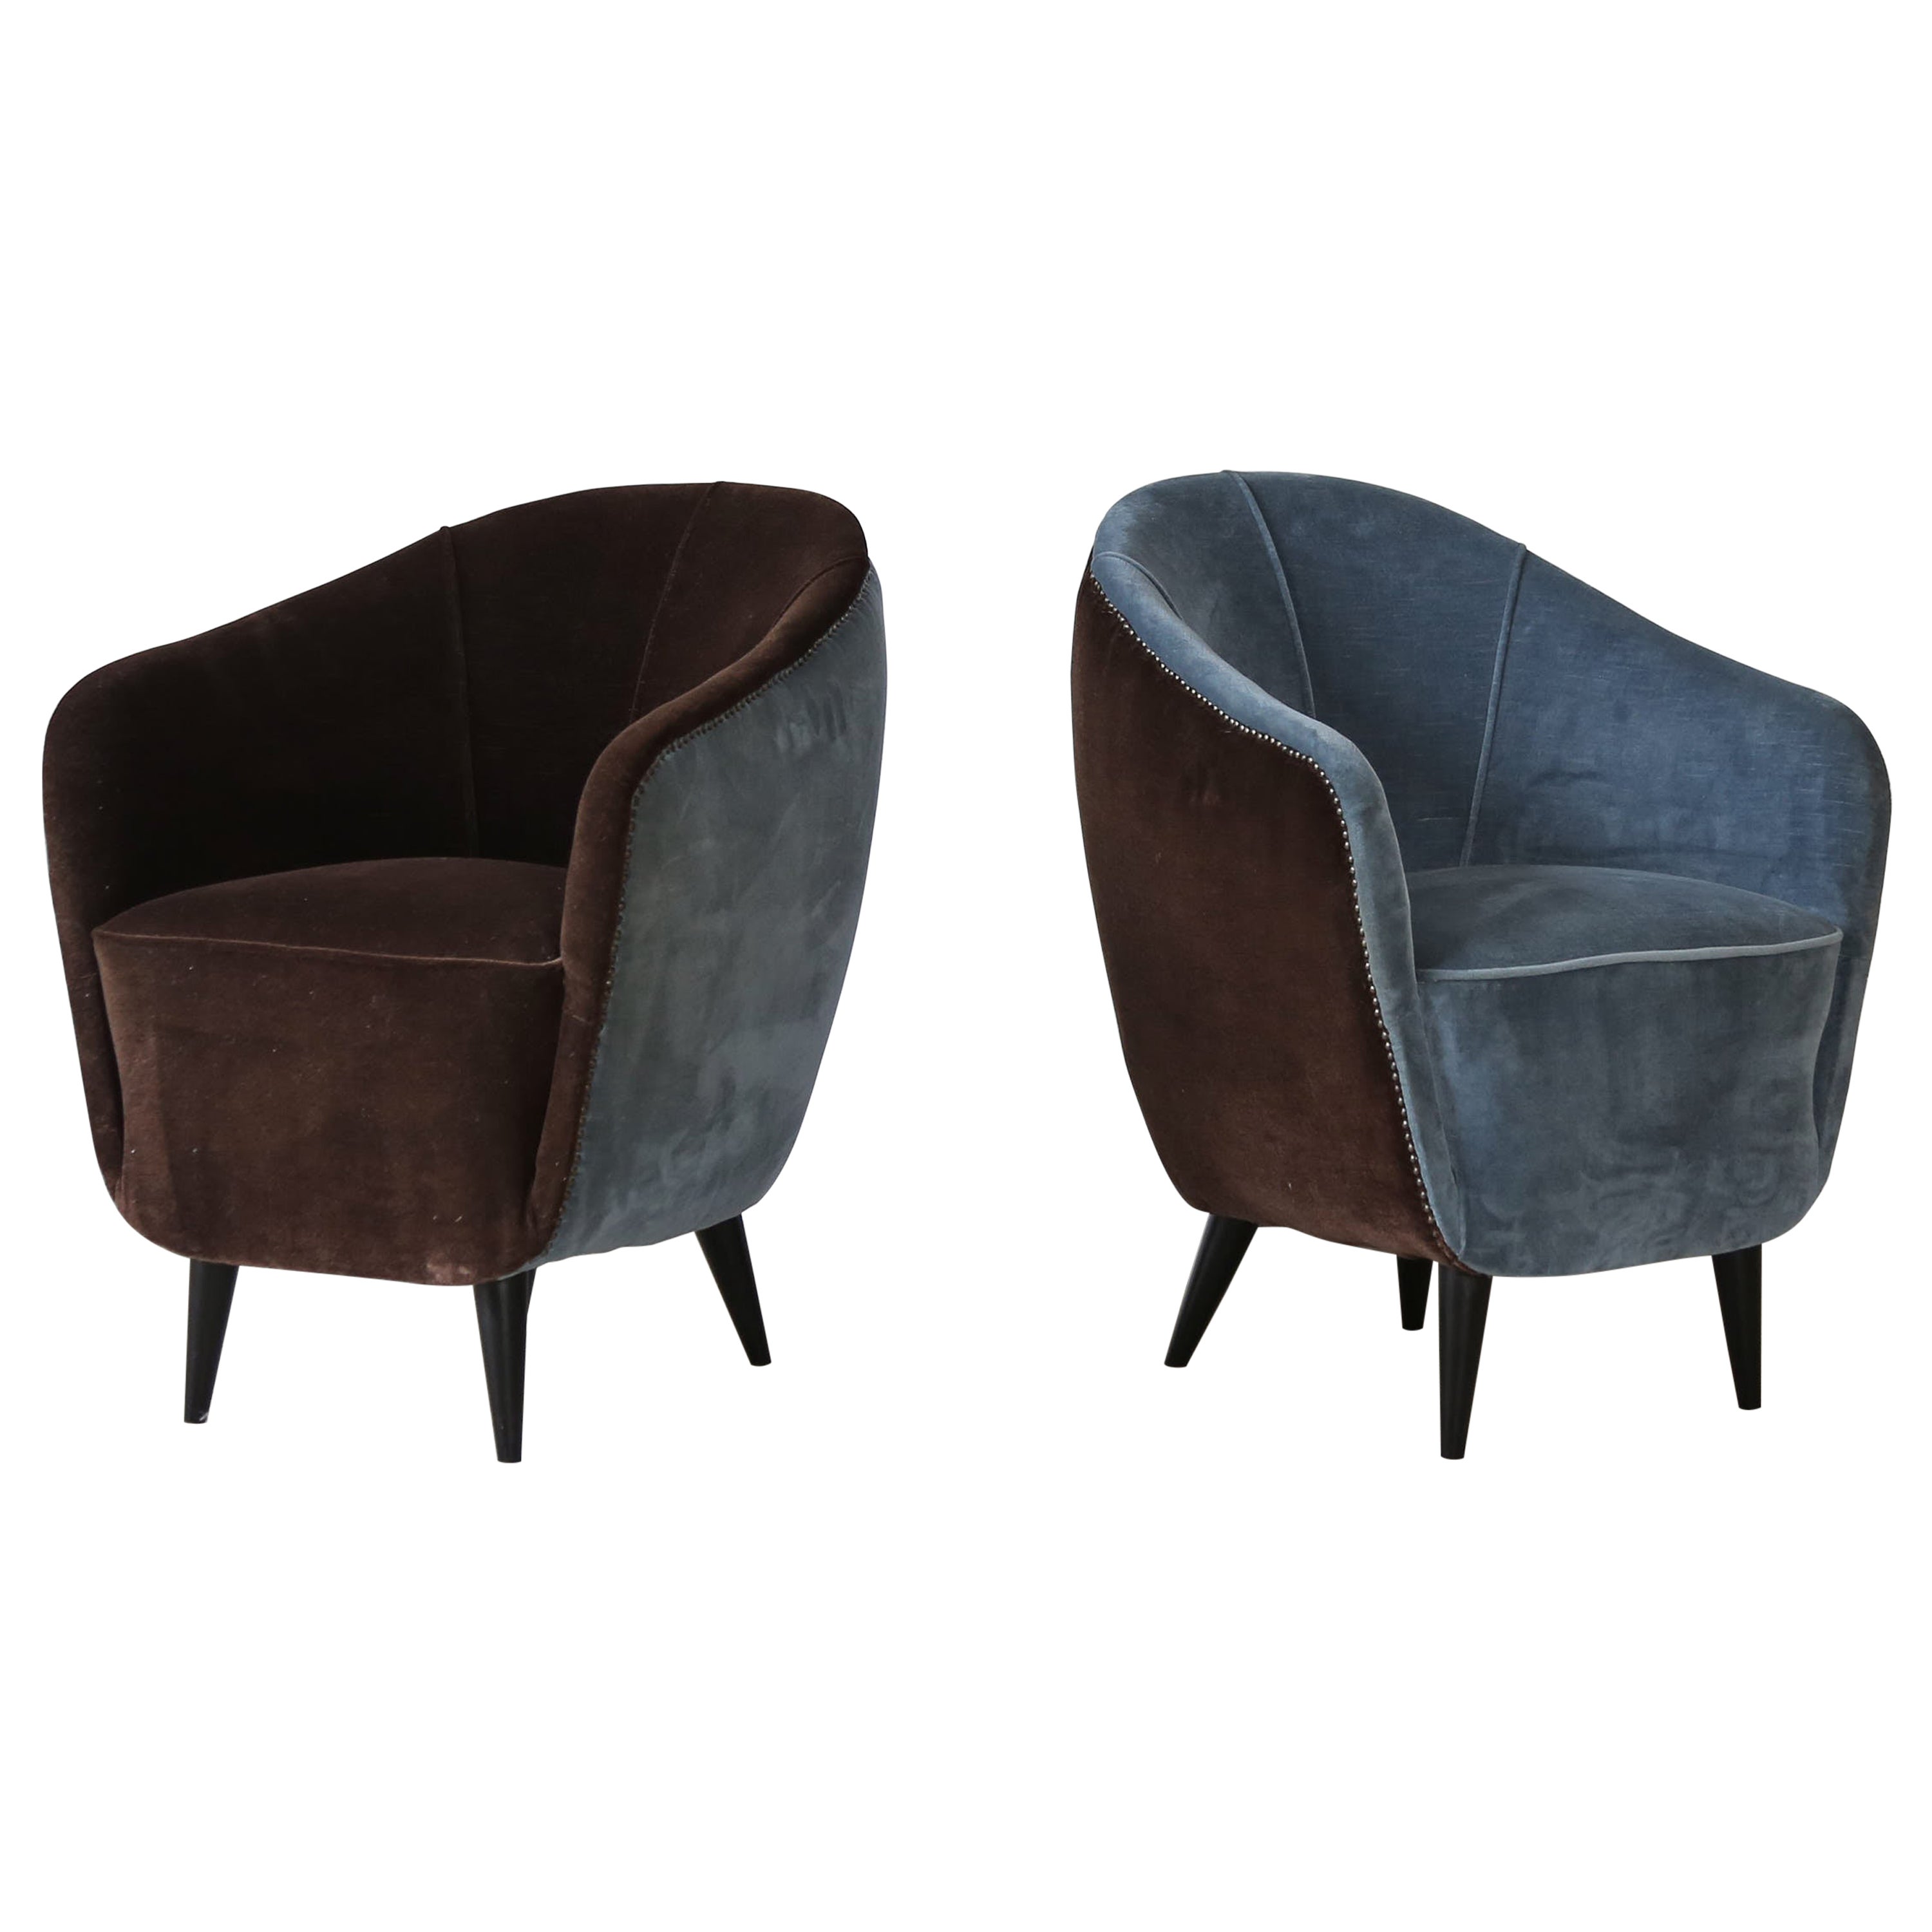 Pair of Gio Ponti Style Chairs, Italy, 1960s For Sale